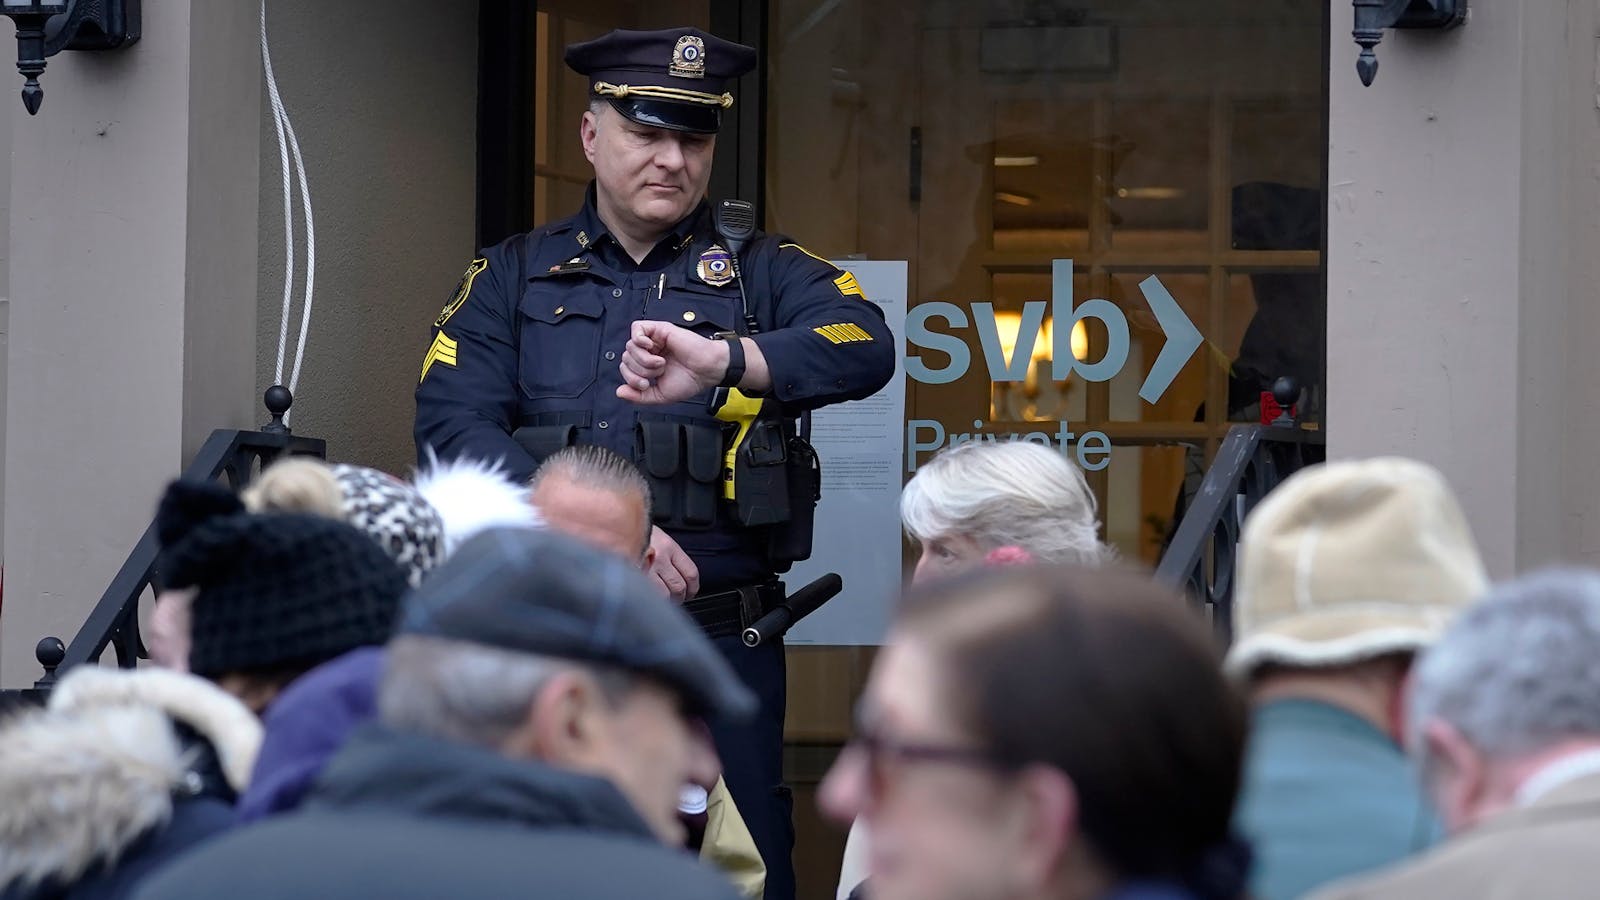 A Wellesley, Mass., police officer glances at his watch as customers and bystanders form a line outside a Silicon Valley Bank branch location, Monday, March 13, 2023, while waiting for the branch to open, in Wellesley, Mass. Photo by AP.